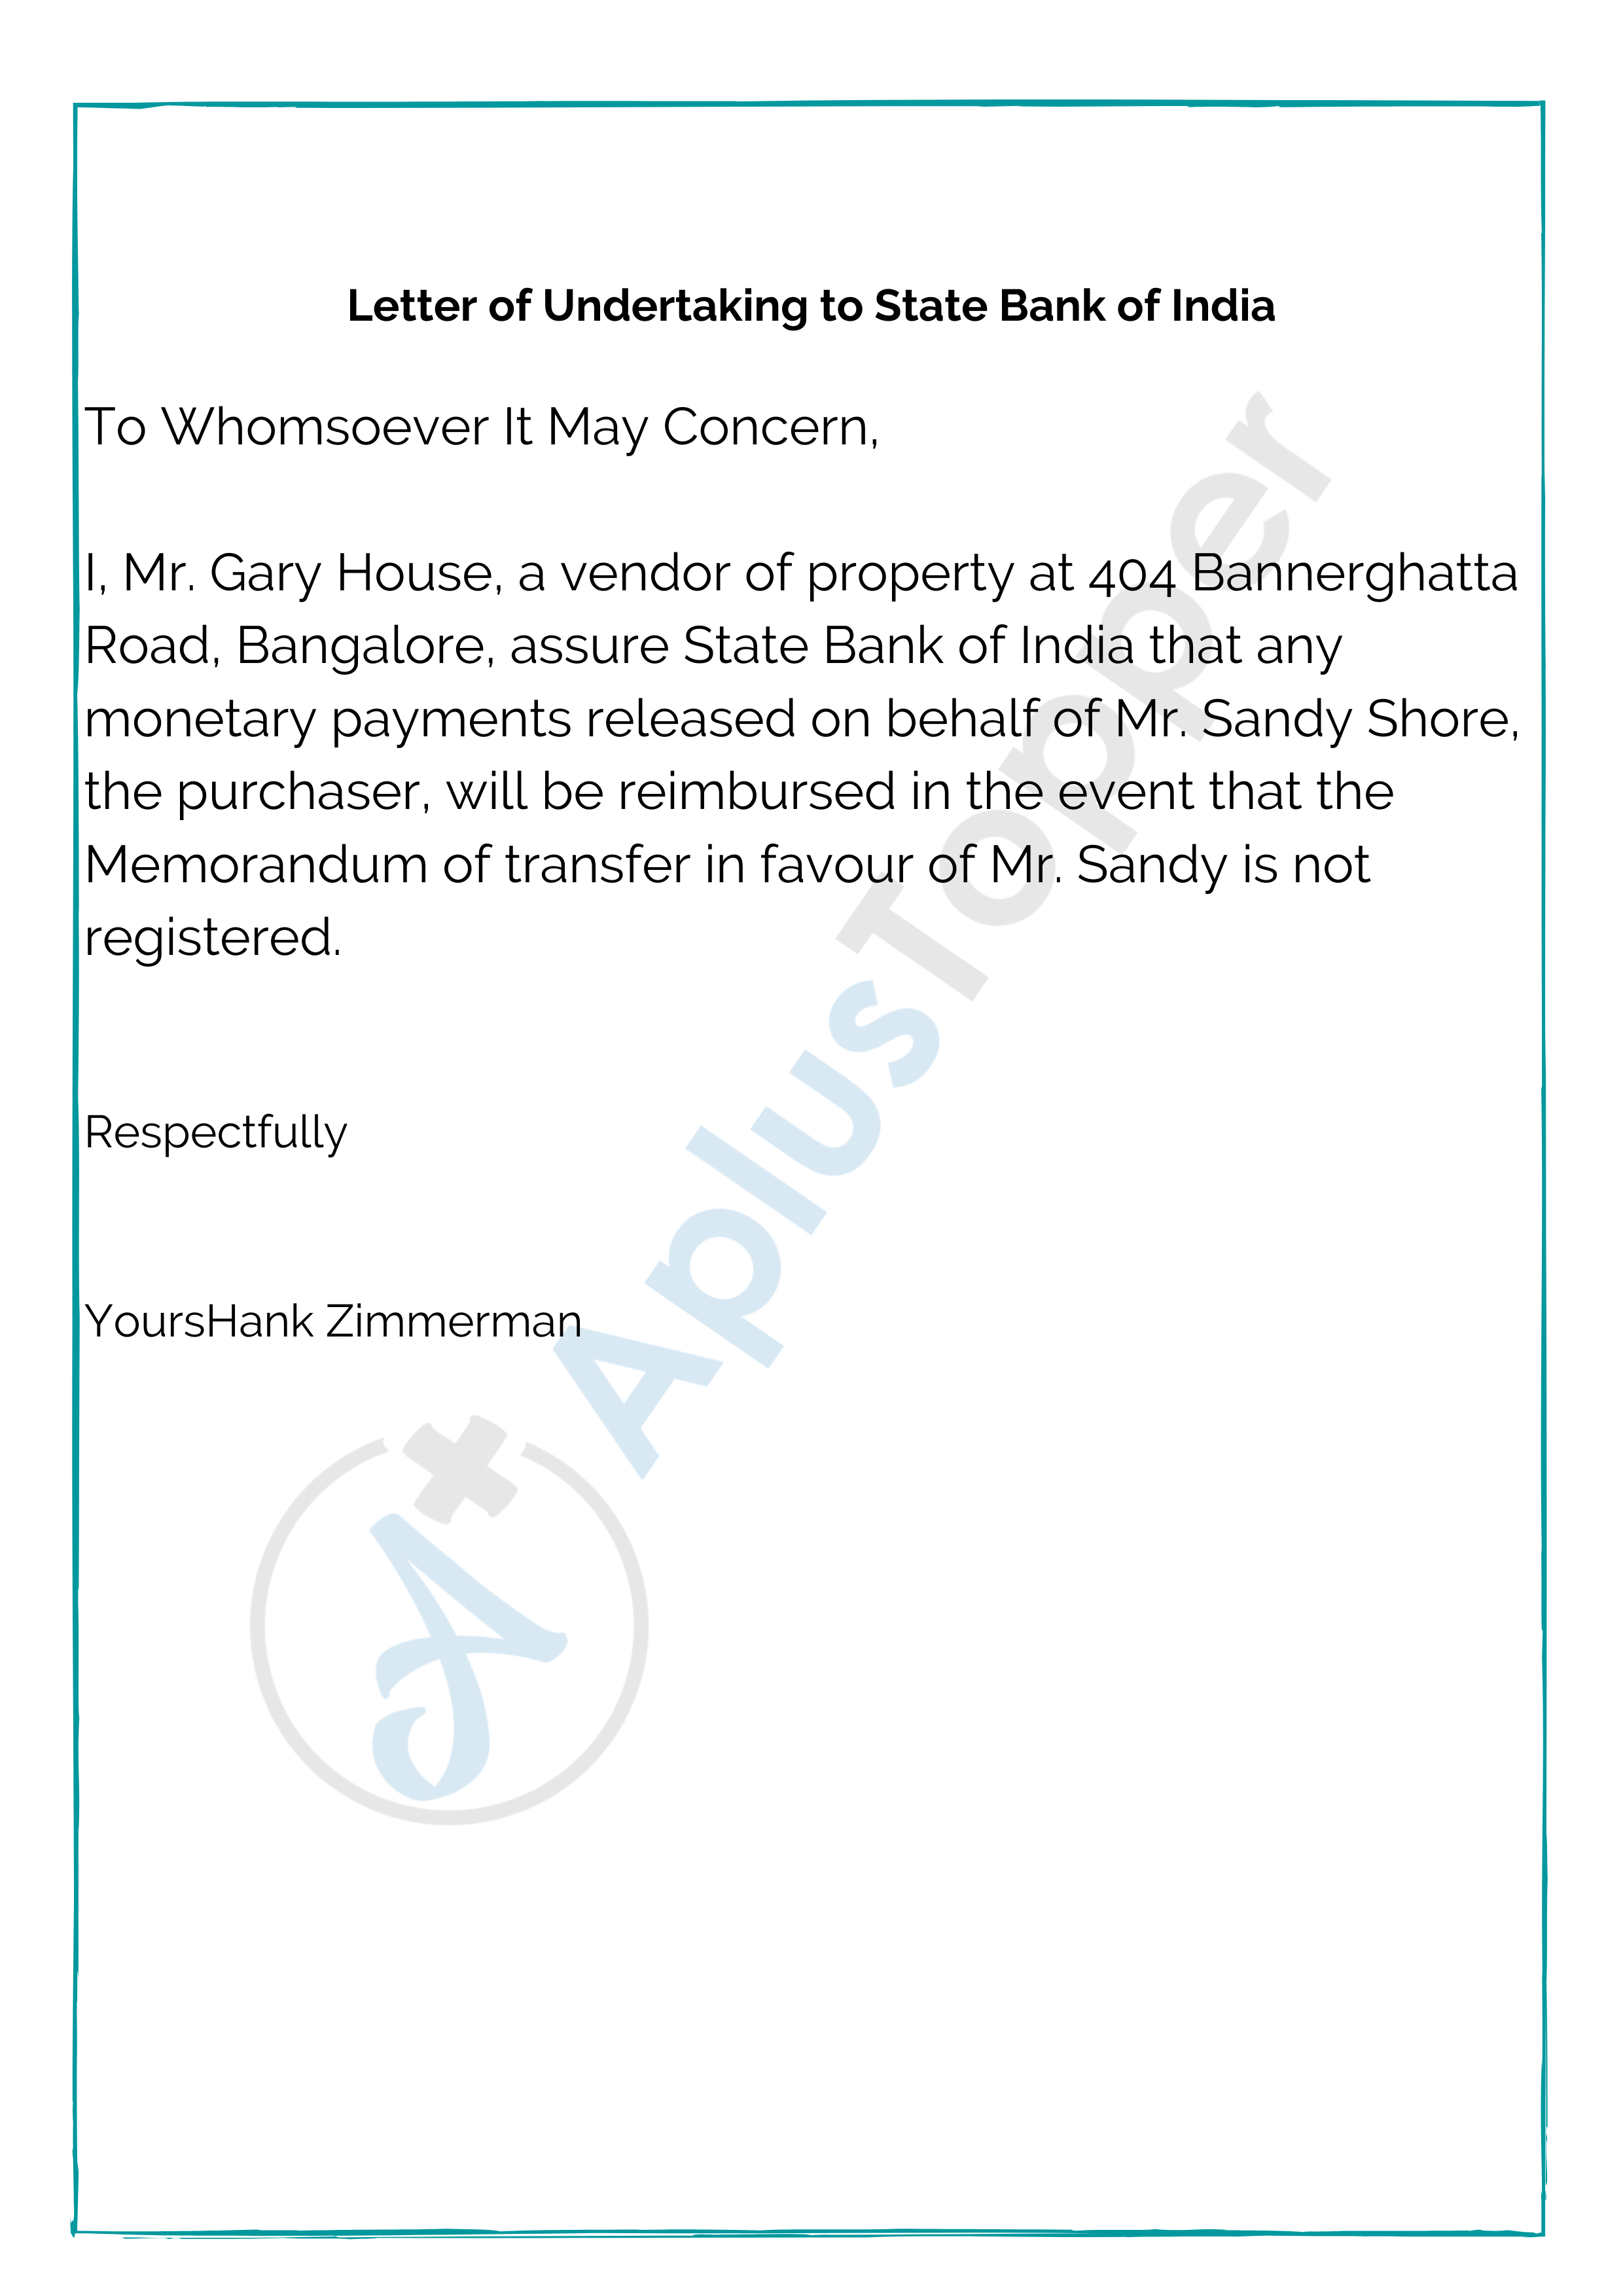 Letter of Undertaking to State Bank of India